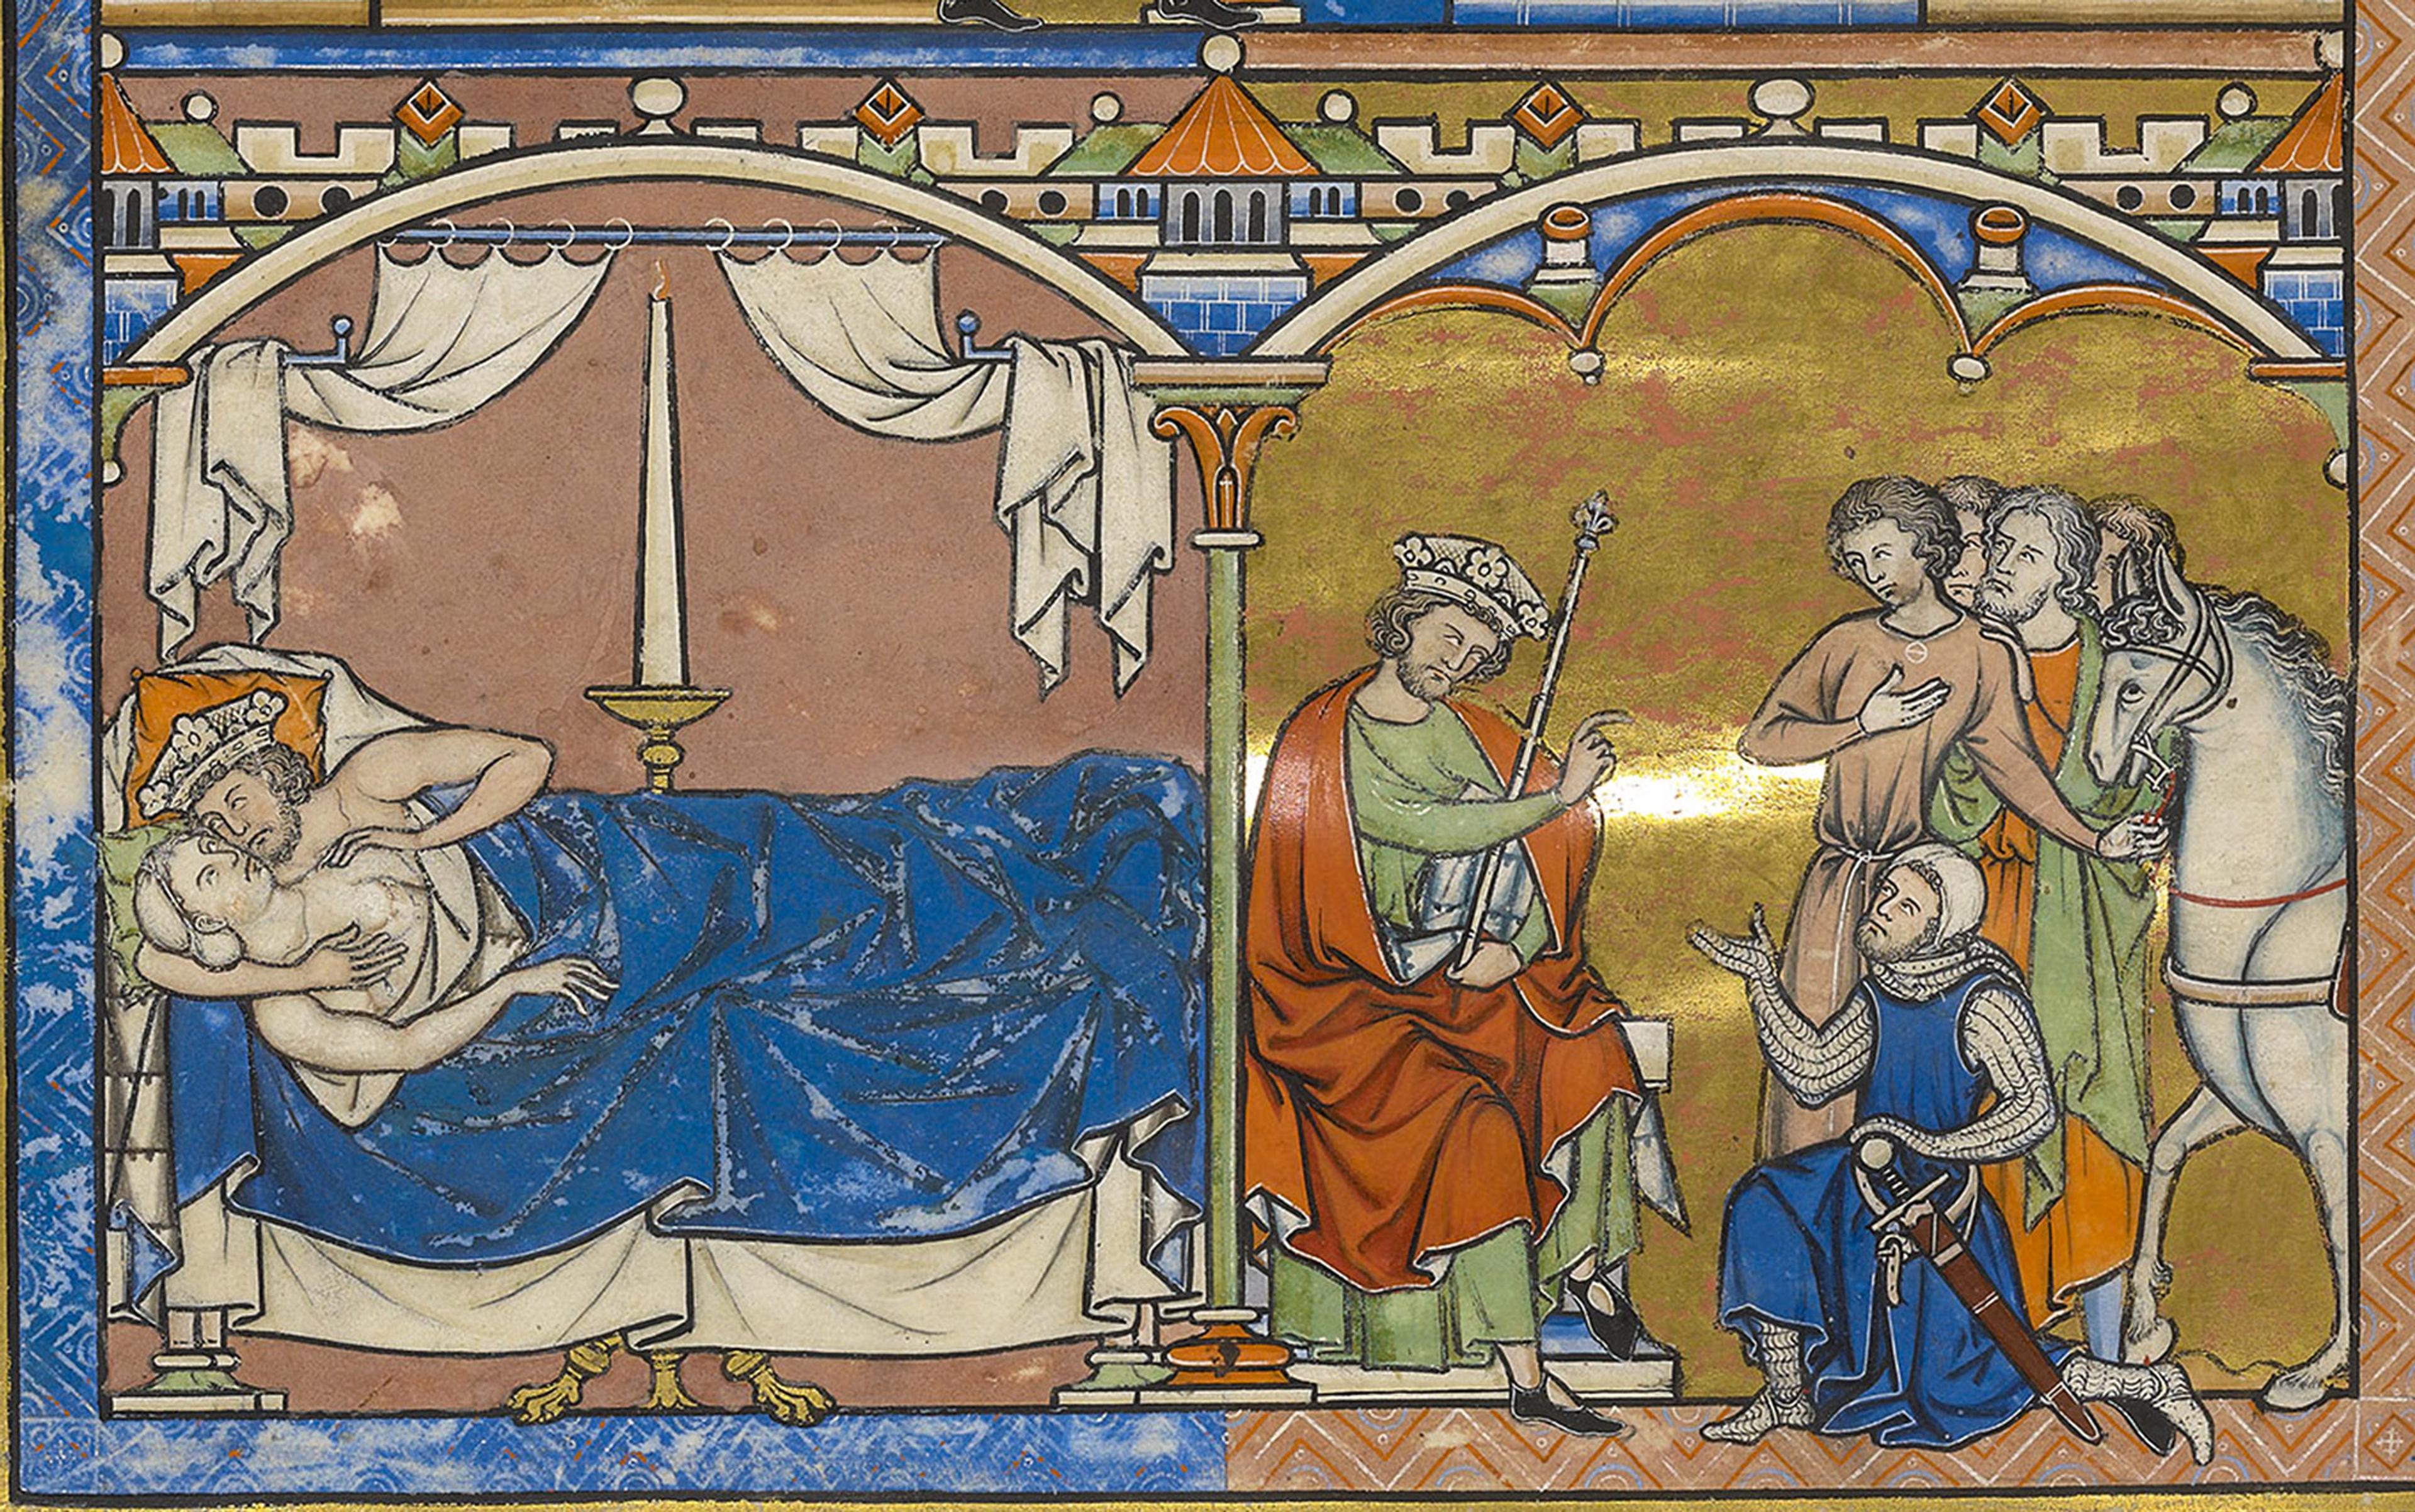 Medieval illustration of a couple in bed on the left and a king holding a sceptre, interacting with several figures and a horse on the right.